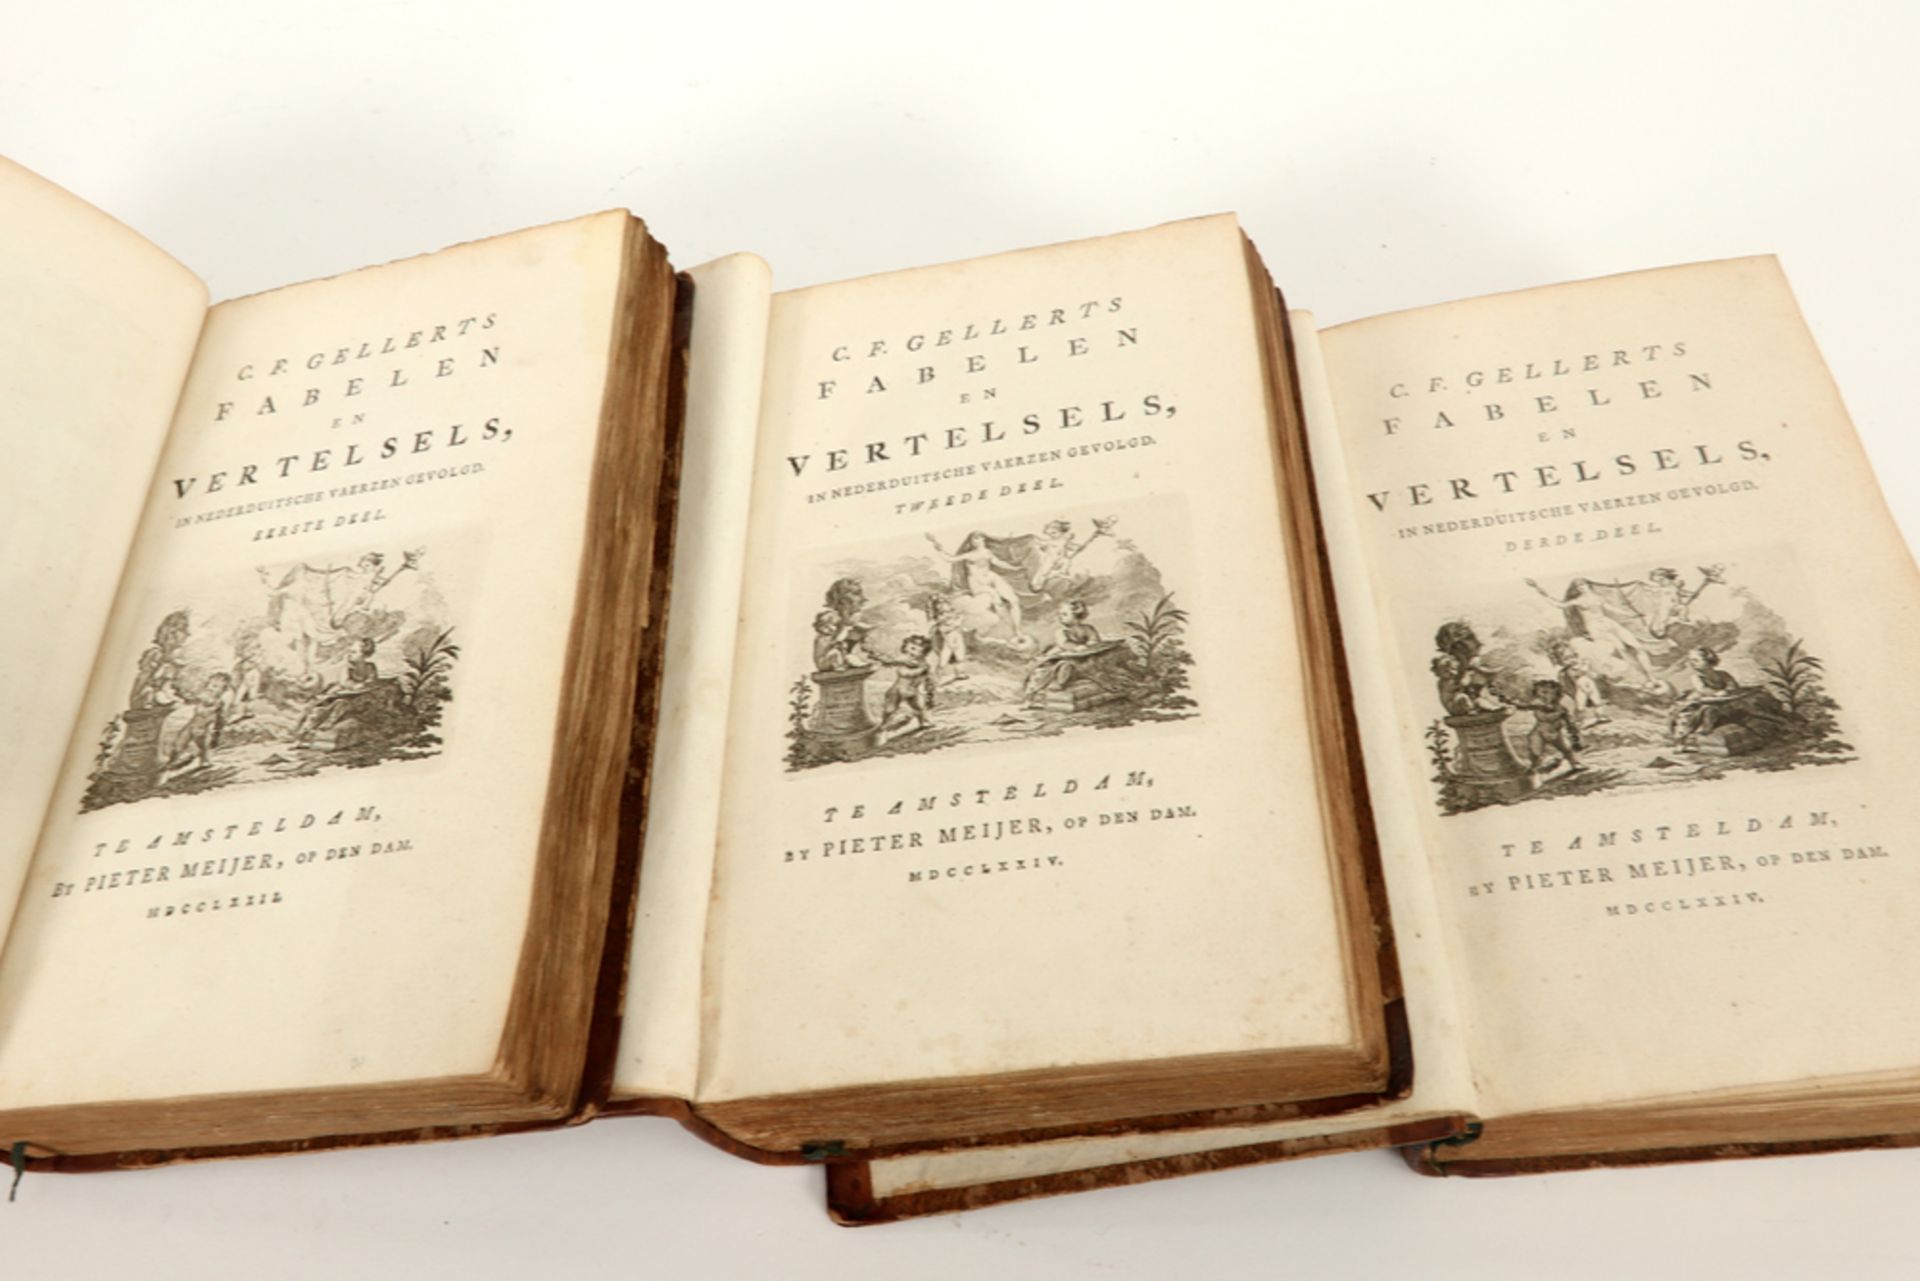 18th Cent. series of three books bound in leather - with a lot of engravings || Achttiende eeuwse